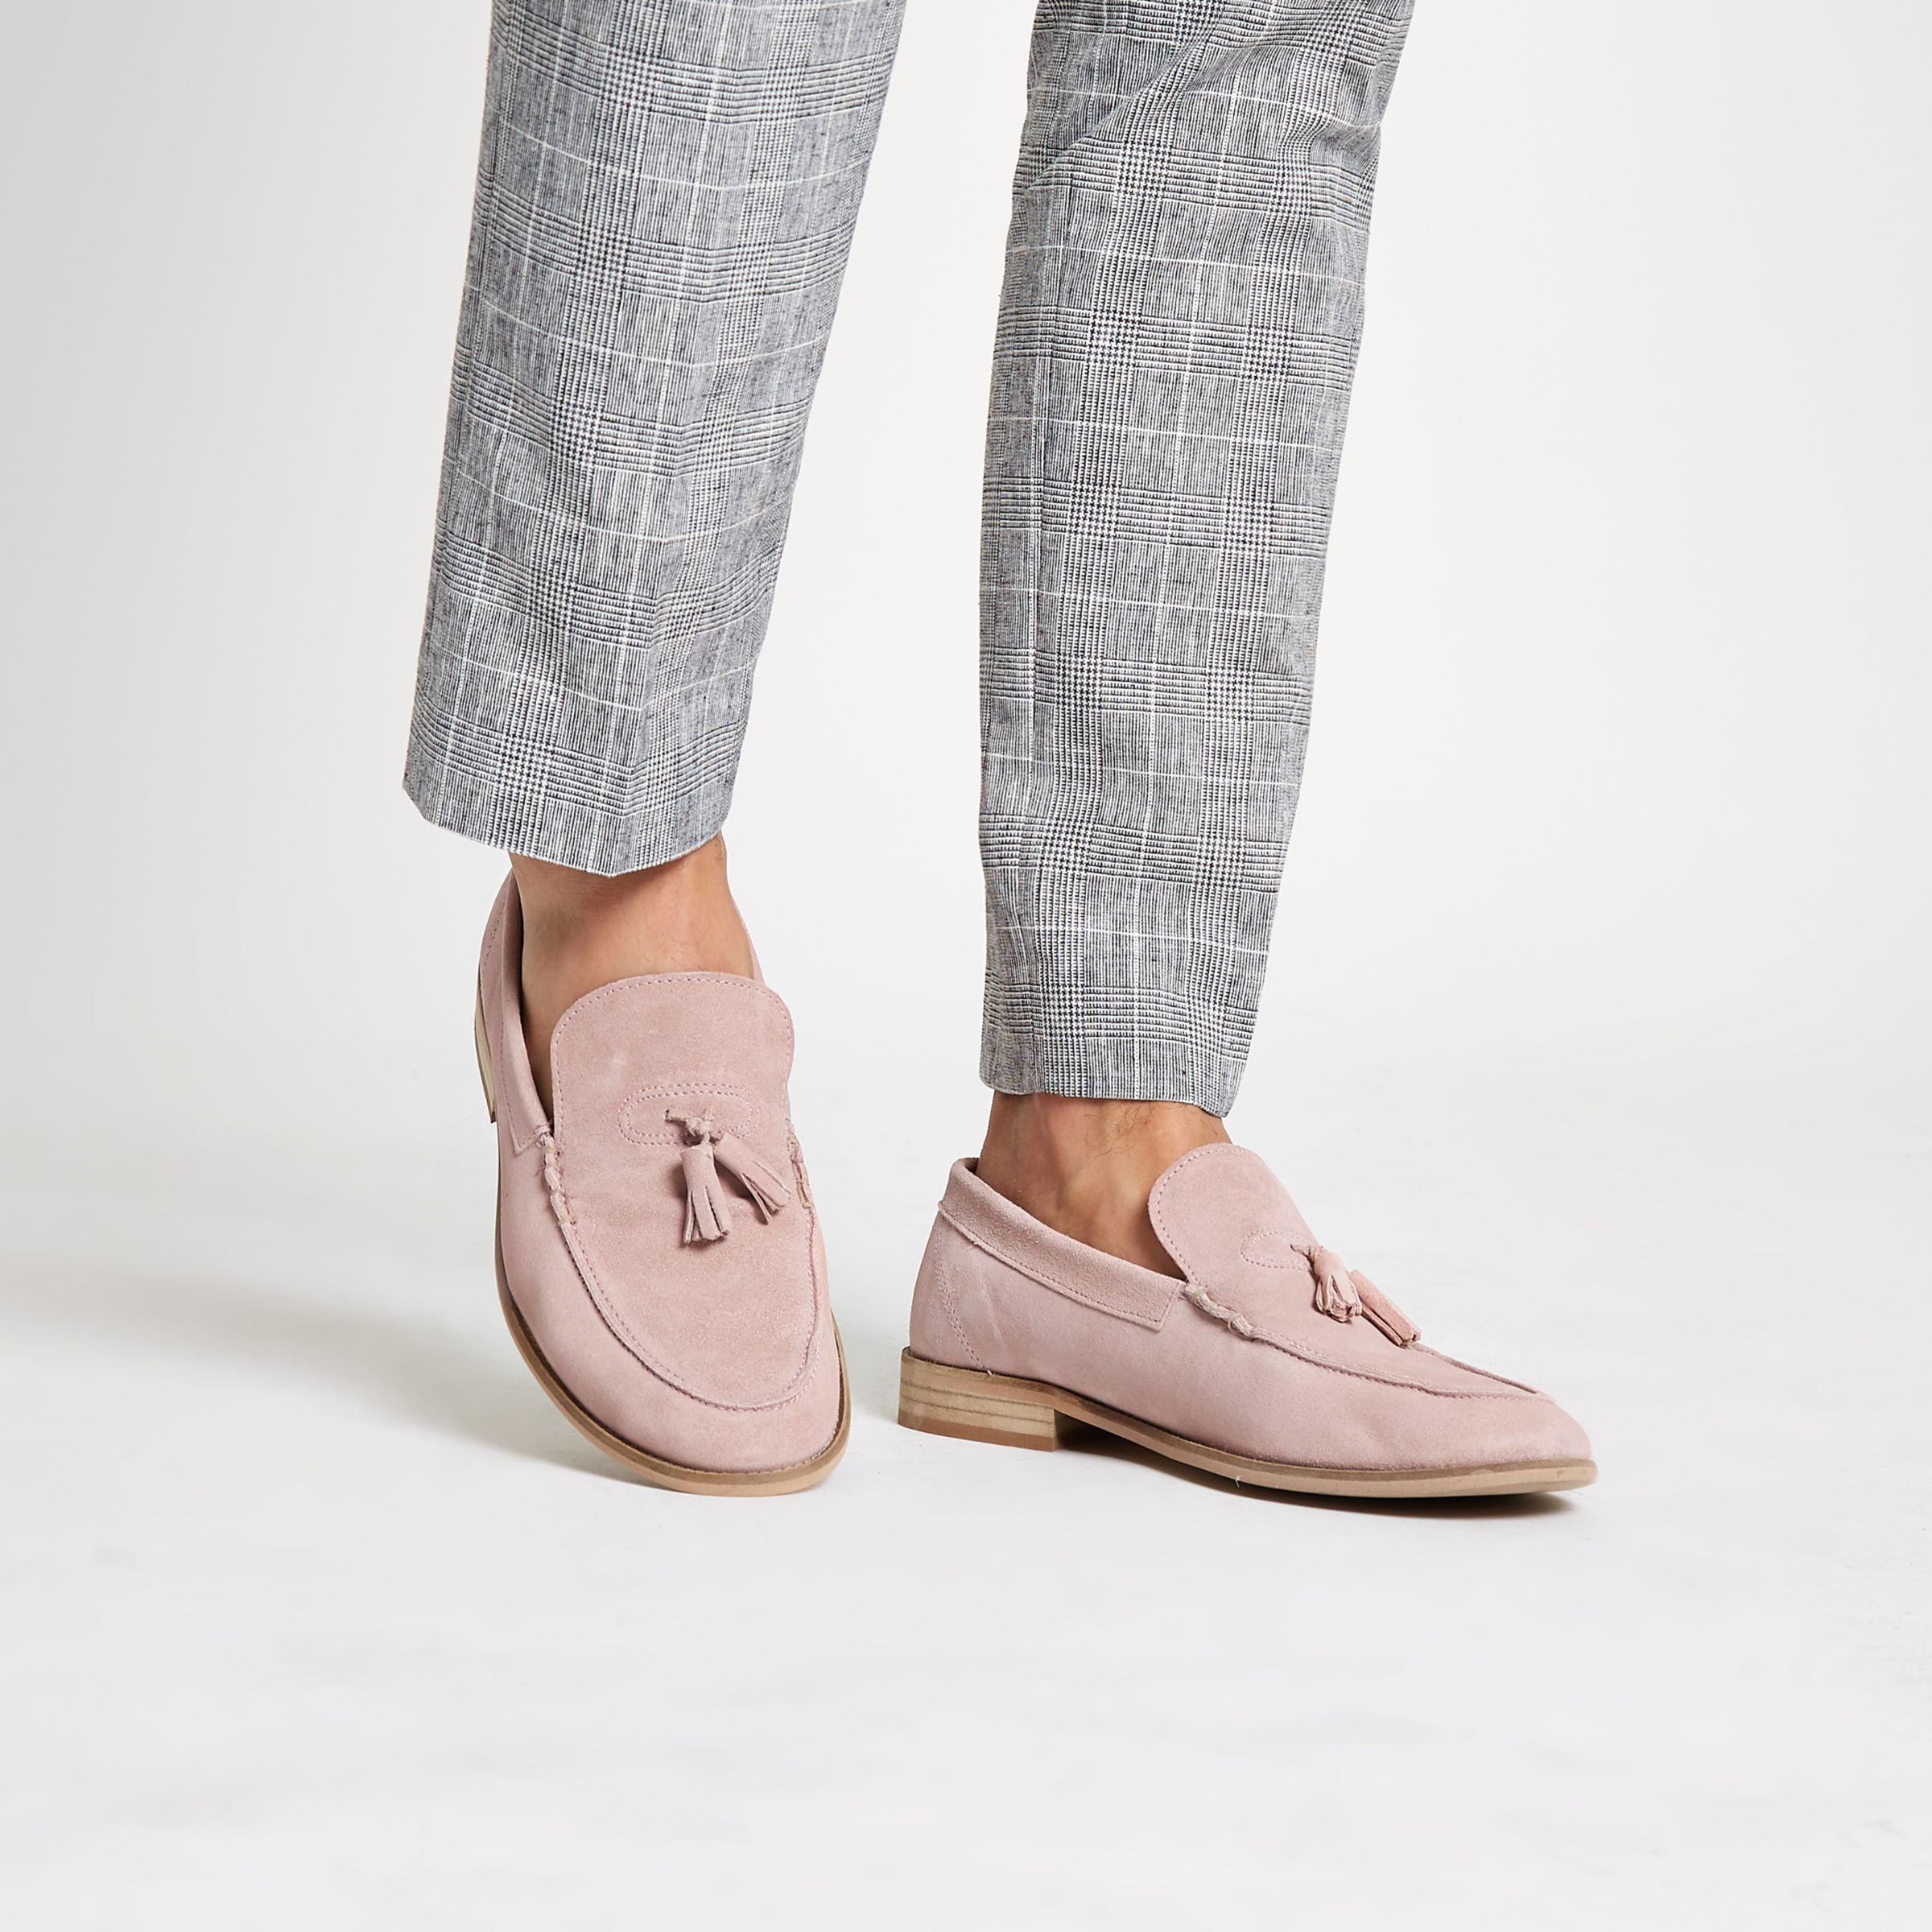 River Island Light Pink Suede Tassel Loafers for Lyst